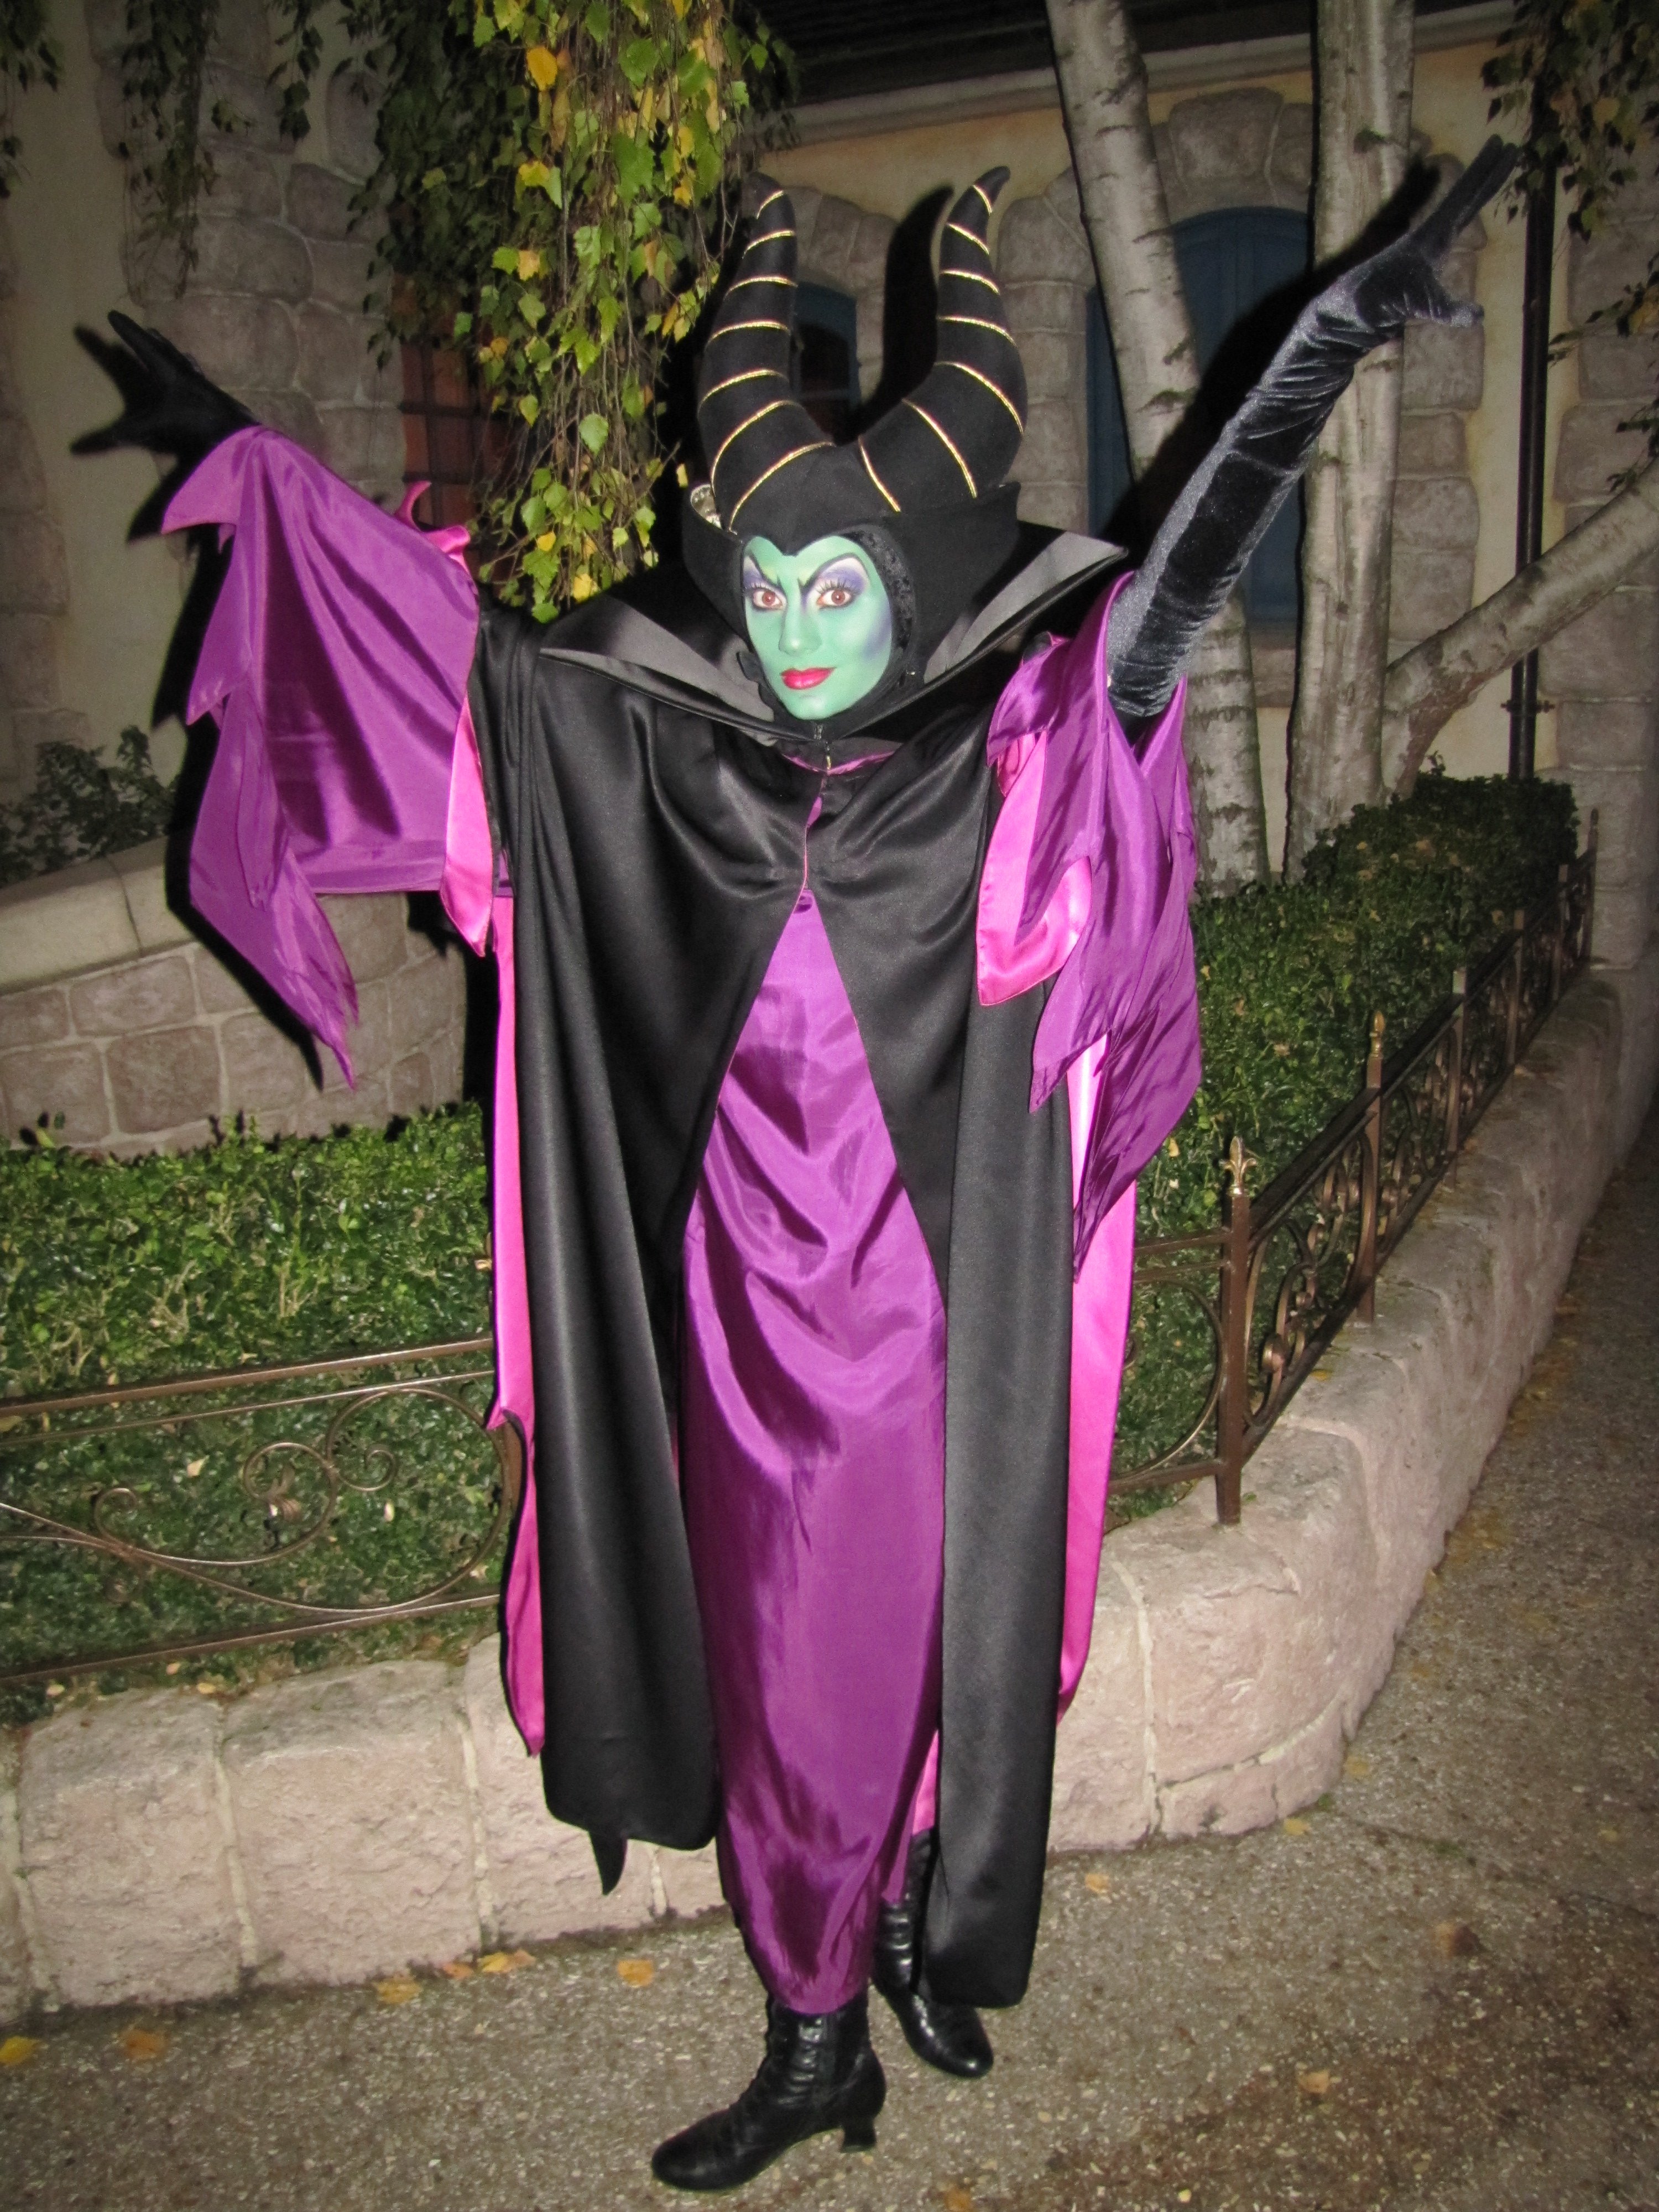 Malificent can be found at Disneyland Paris during the Halloween Season. During this season she is out for meet'n'greets almost every day.